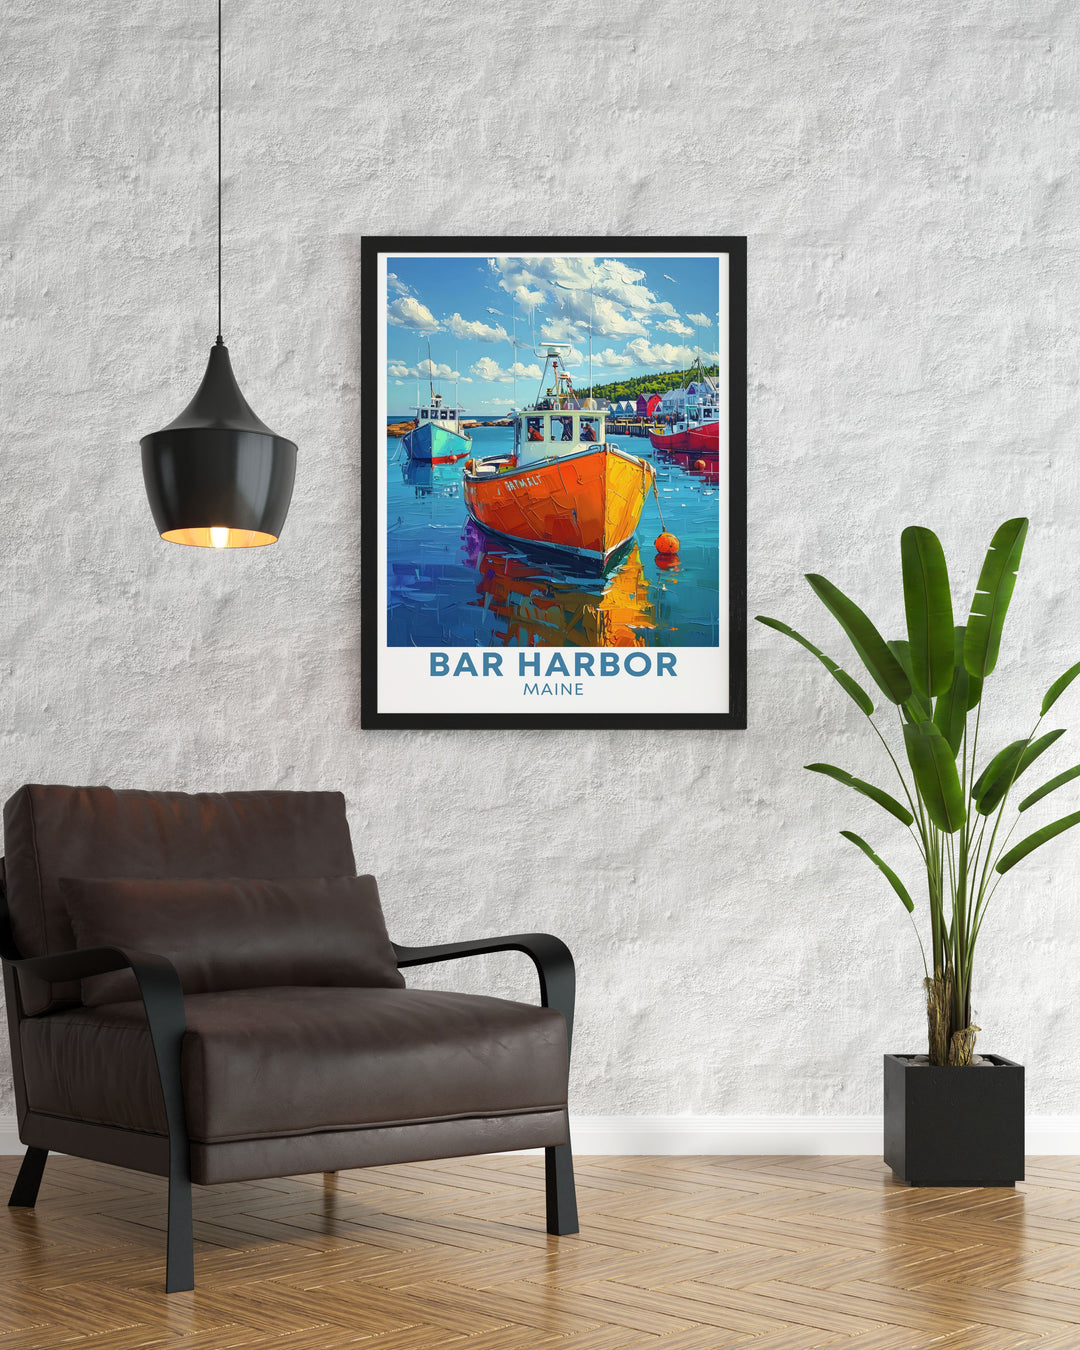 Featuring the vibrant streets and historic landmarks of Bar Harbor, Maine, this travel poster is perfect for those who appreciate the cultural and historical richness of this coastal town.